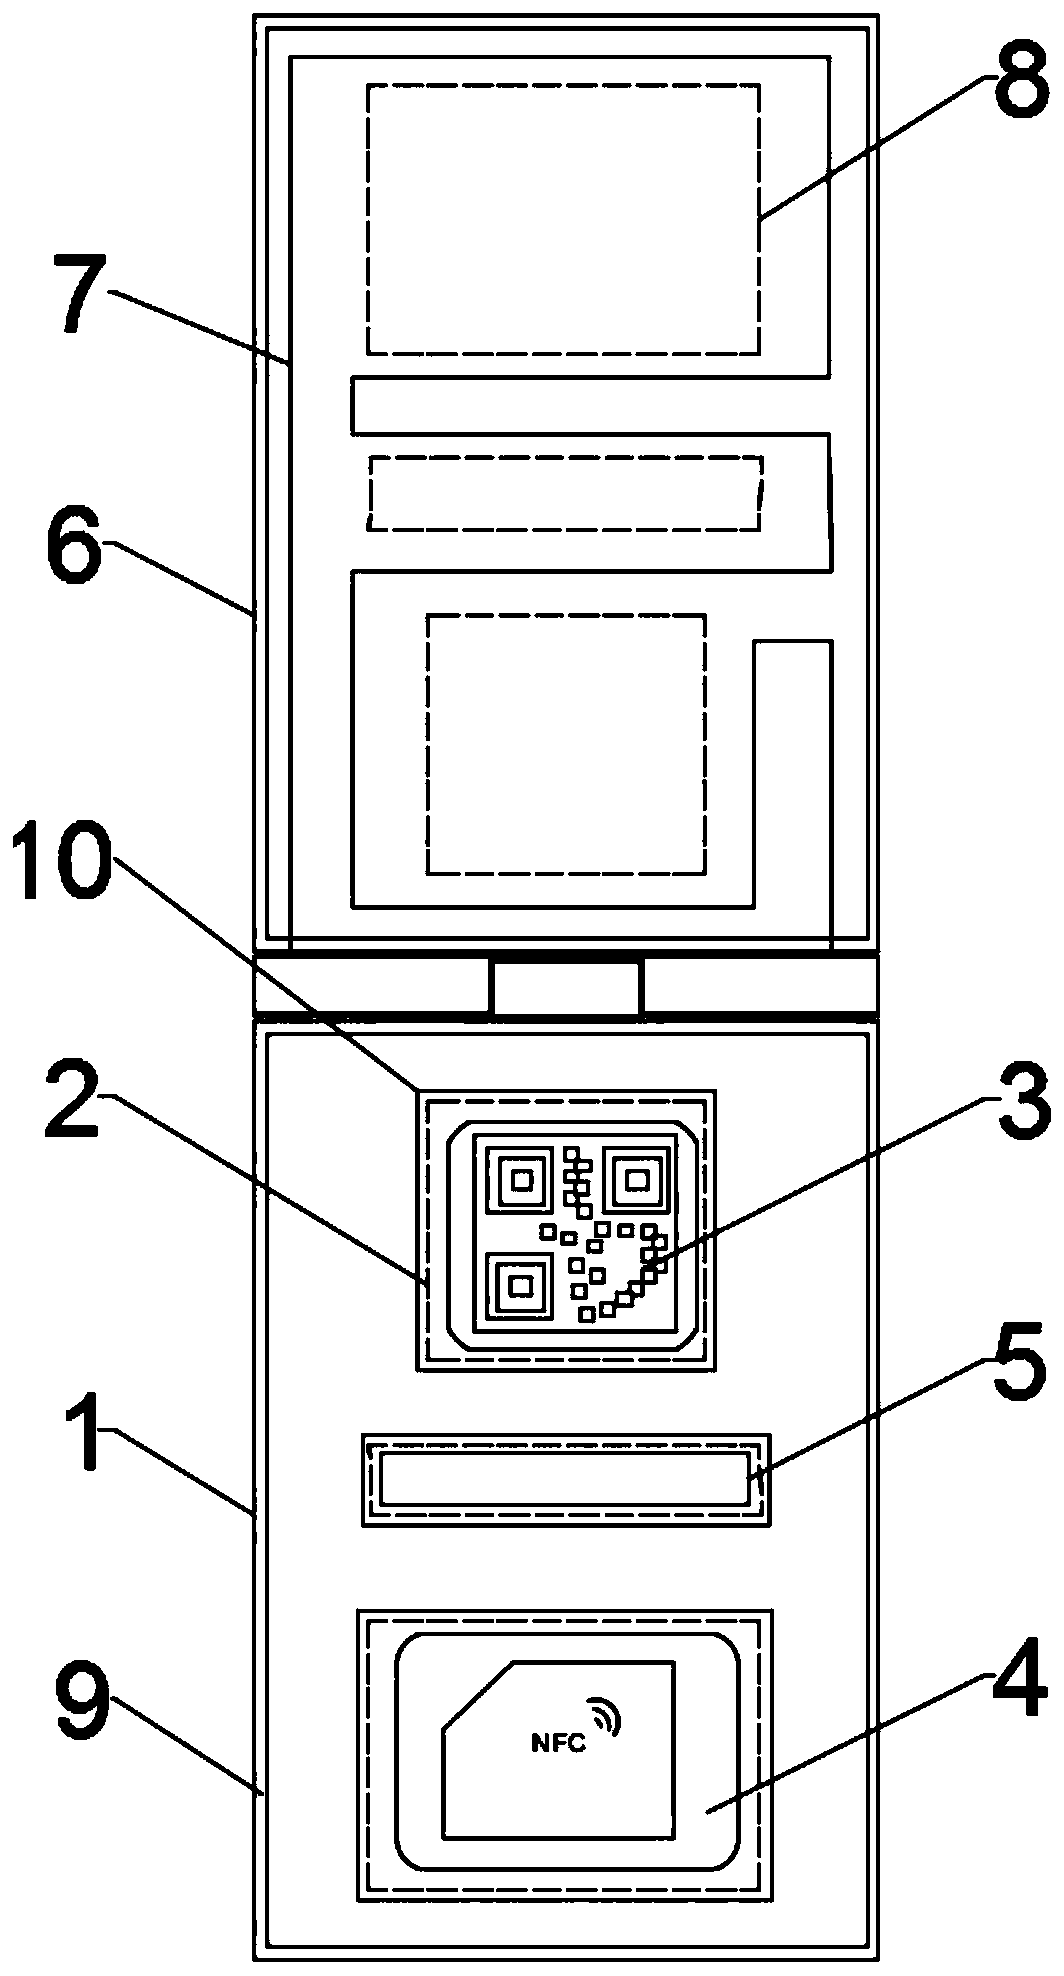 NFC two-dimensional code collaborative equipment operation and maintenance recording system and NFC label